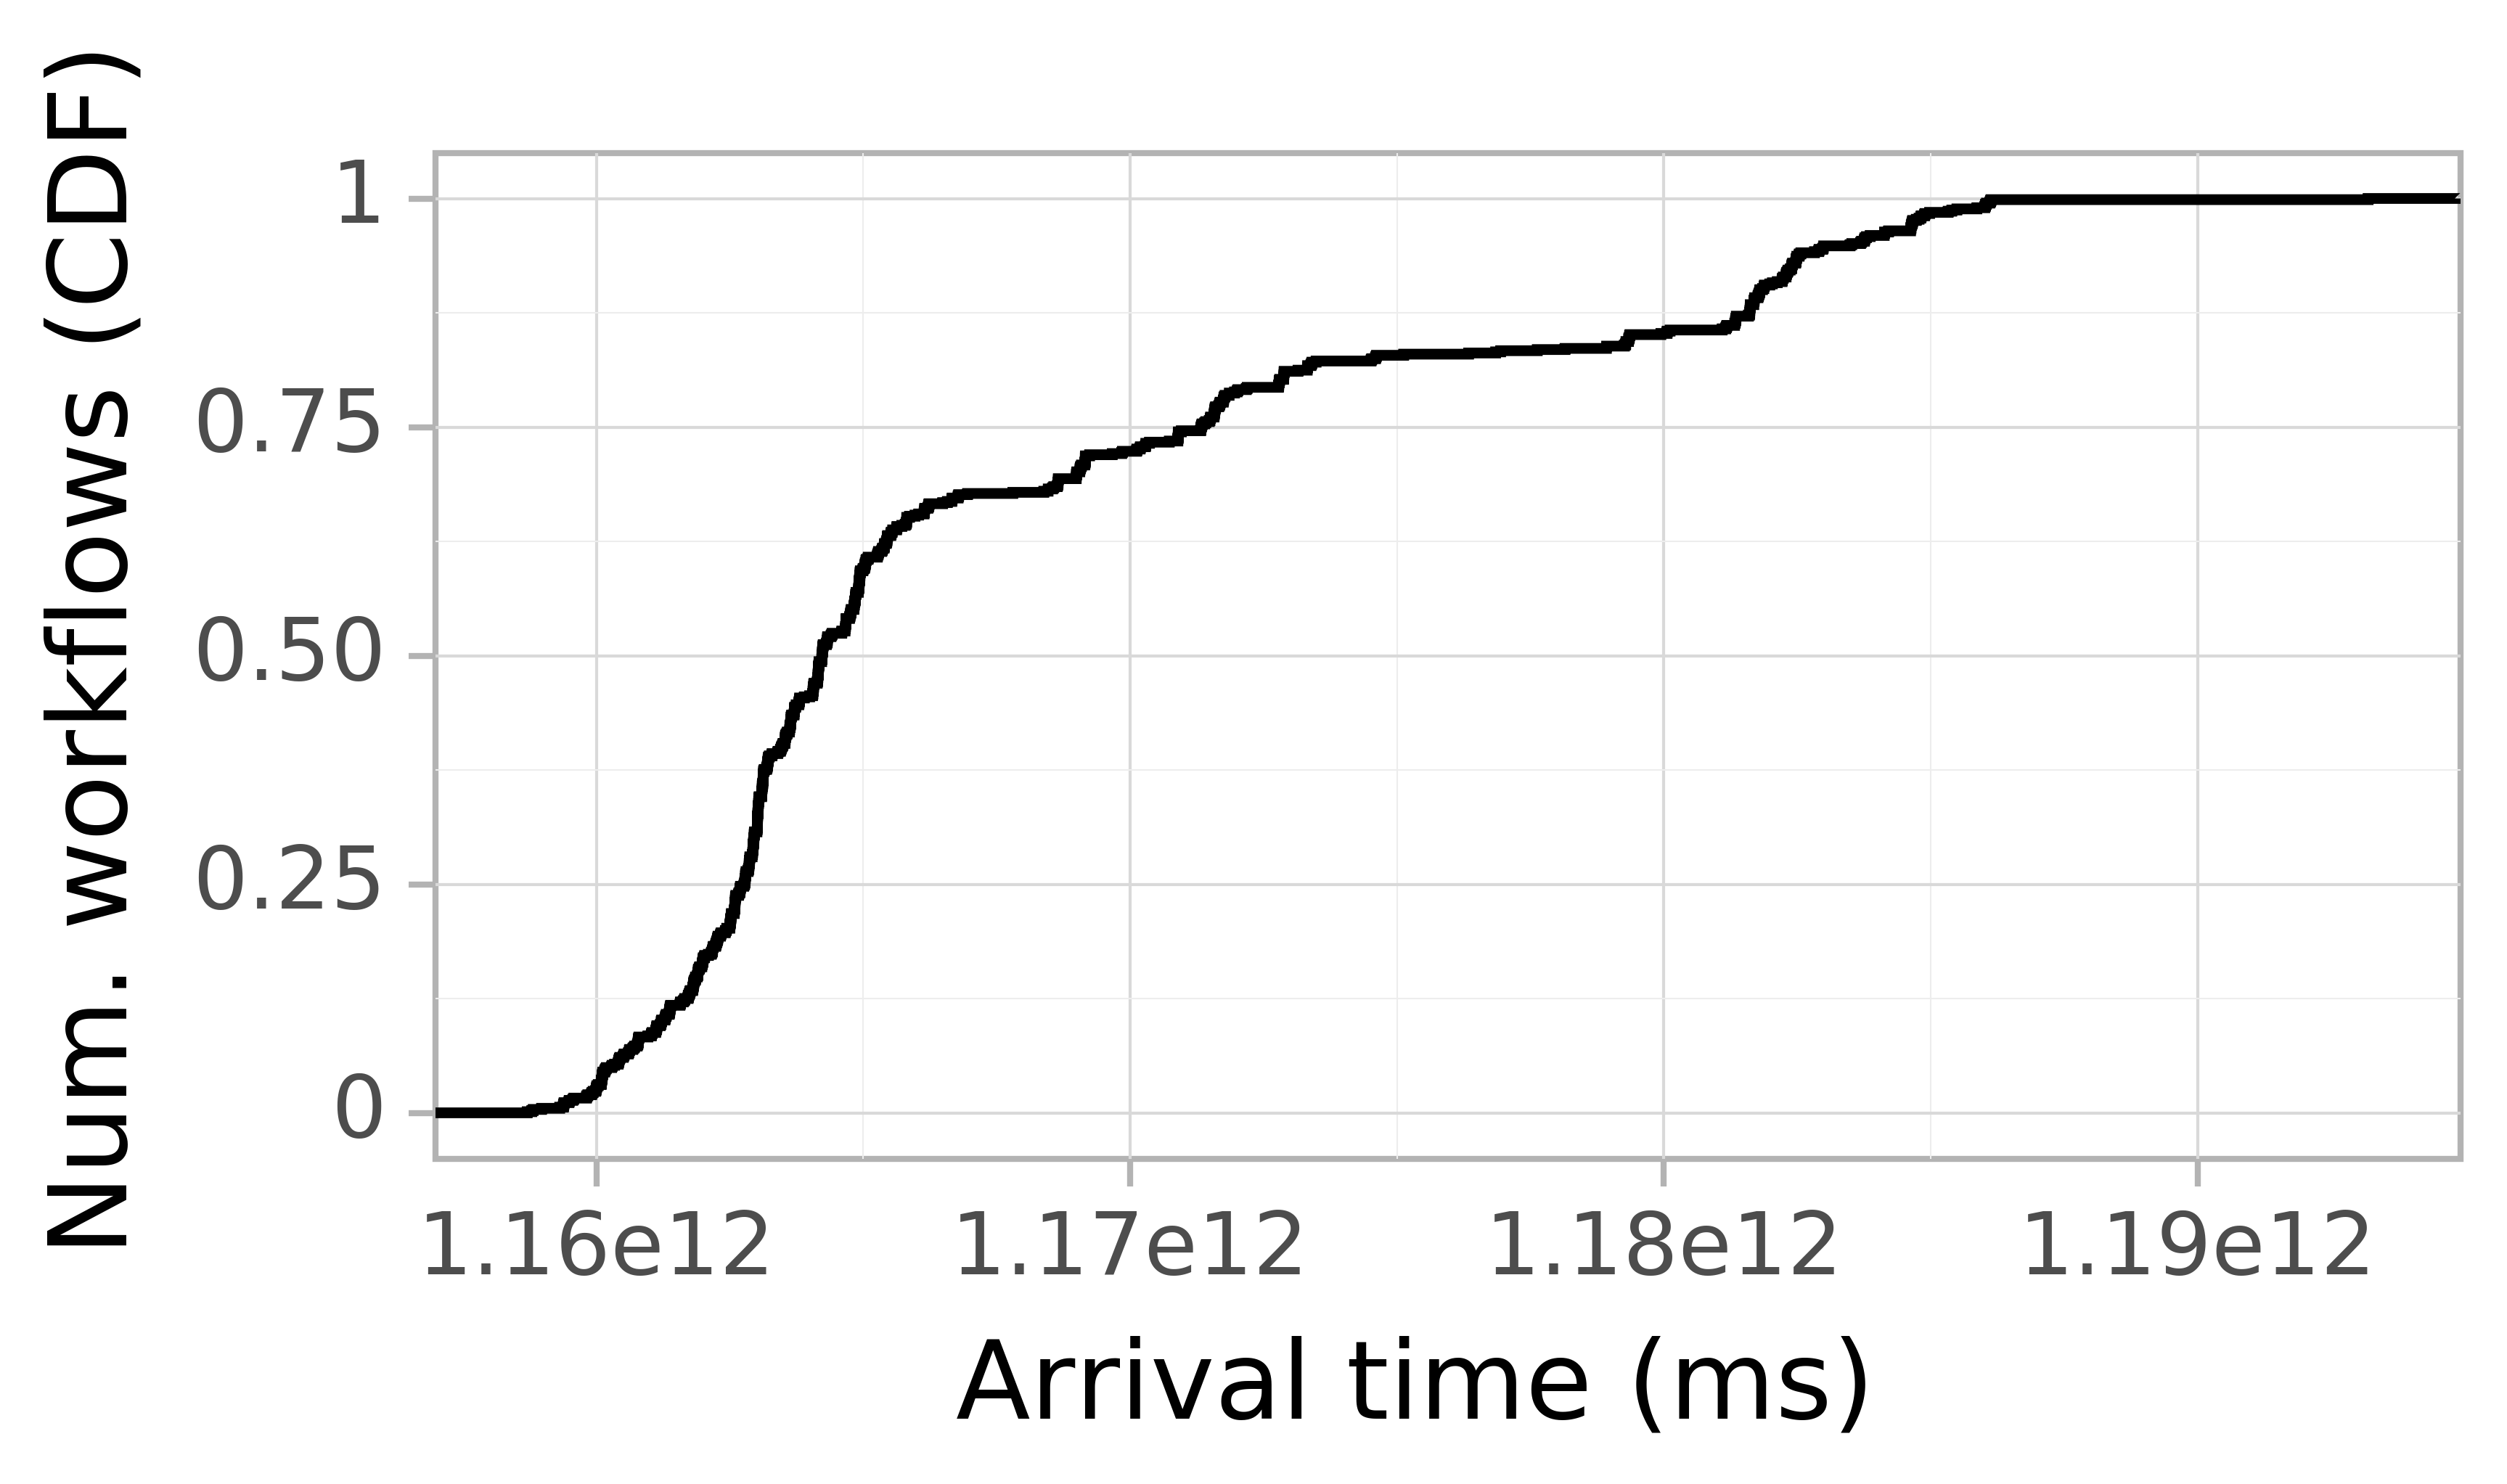 Job arrival CDF graph for the askalon_ee trace.